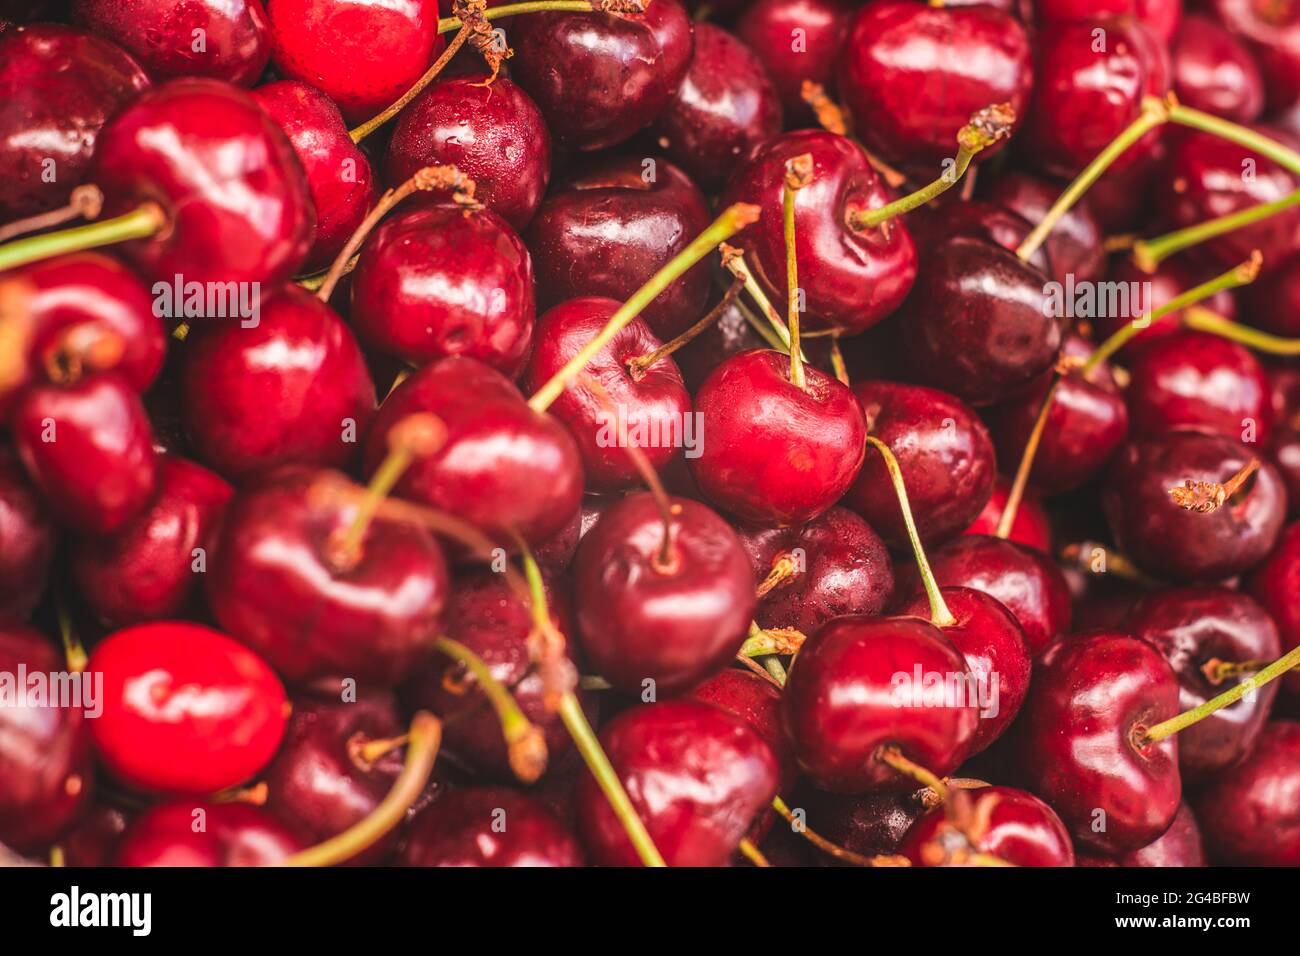 Cherries red and colorful sweet fruits Stock Photo